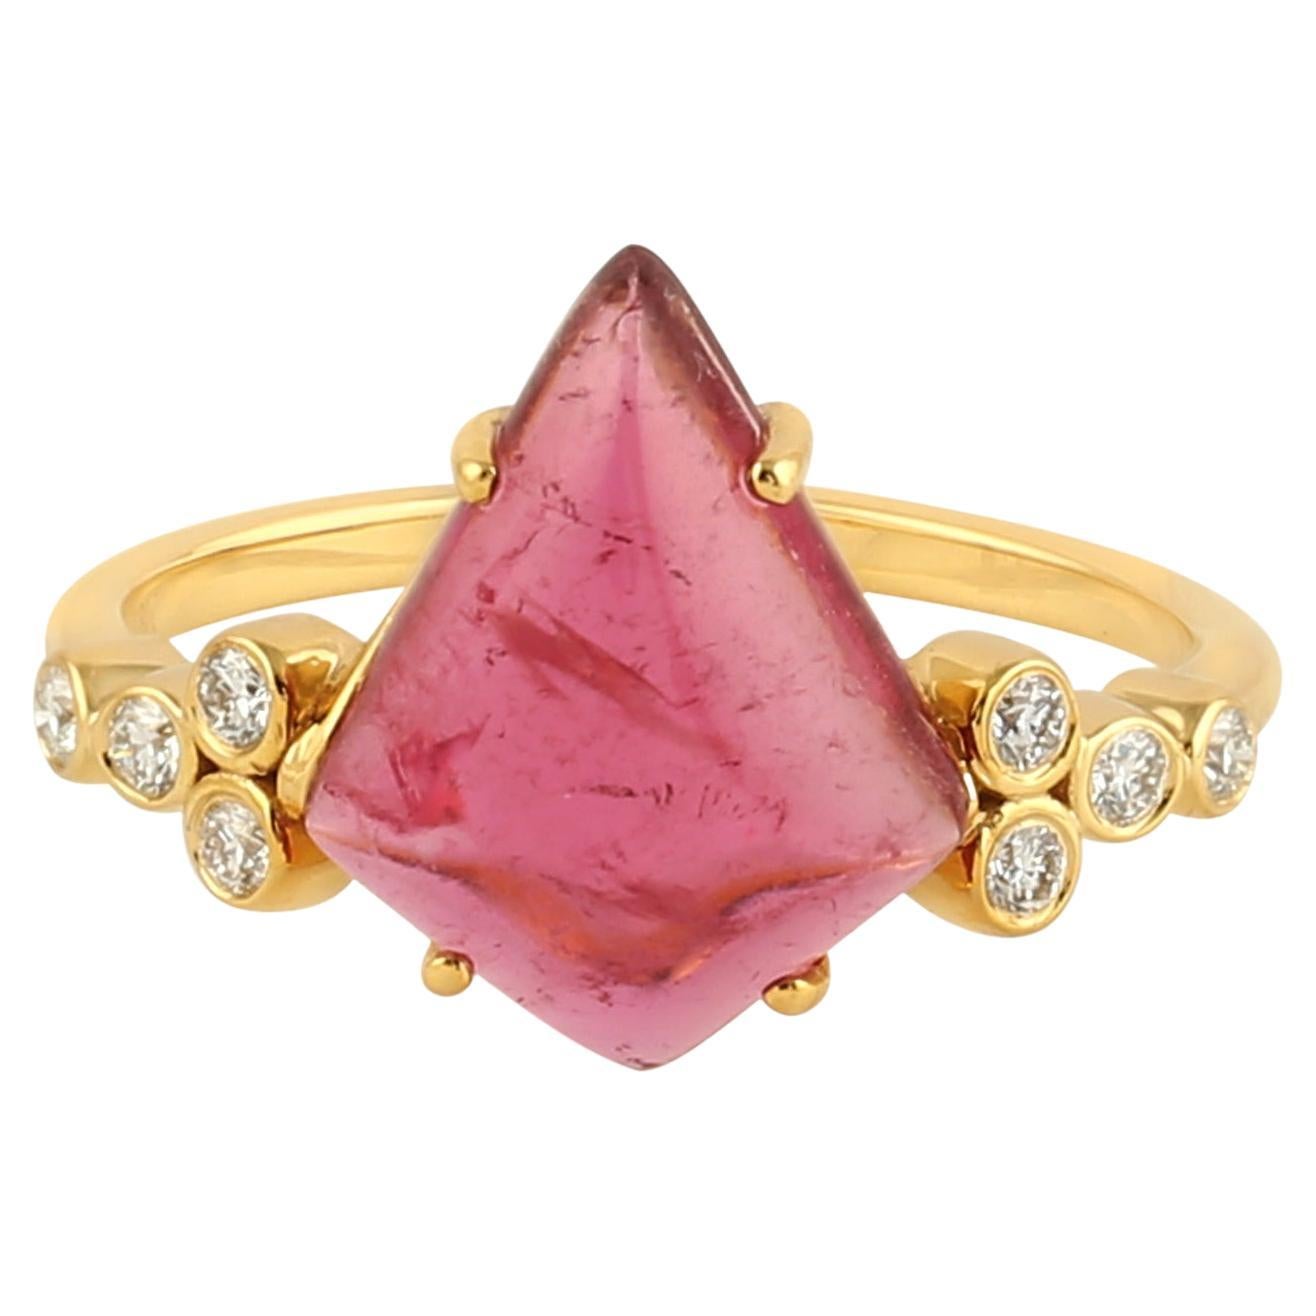 Tourmaline Ring With Diamonds Made In 18k Yellow Gold For Sale